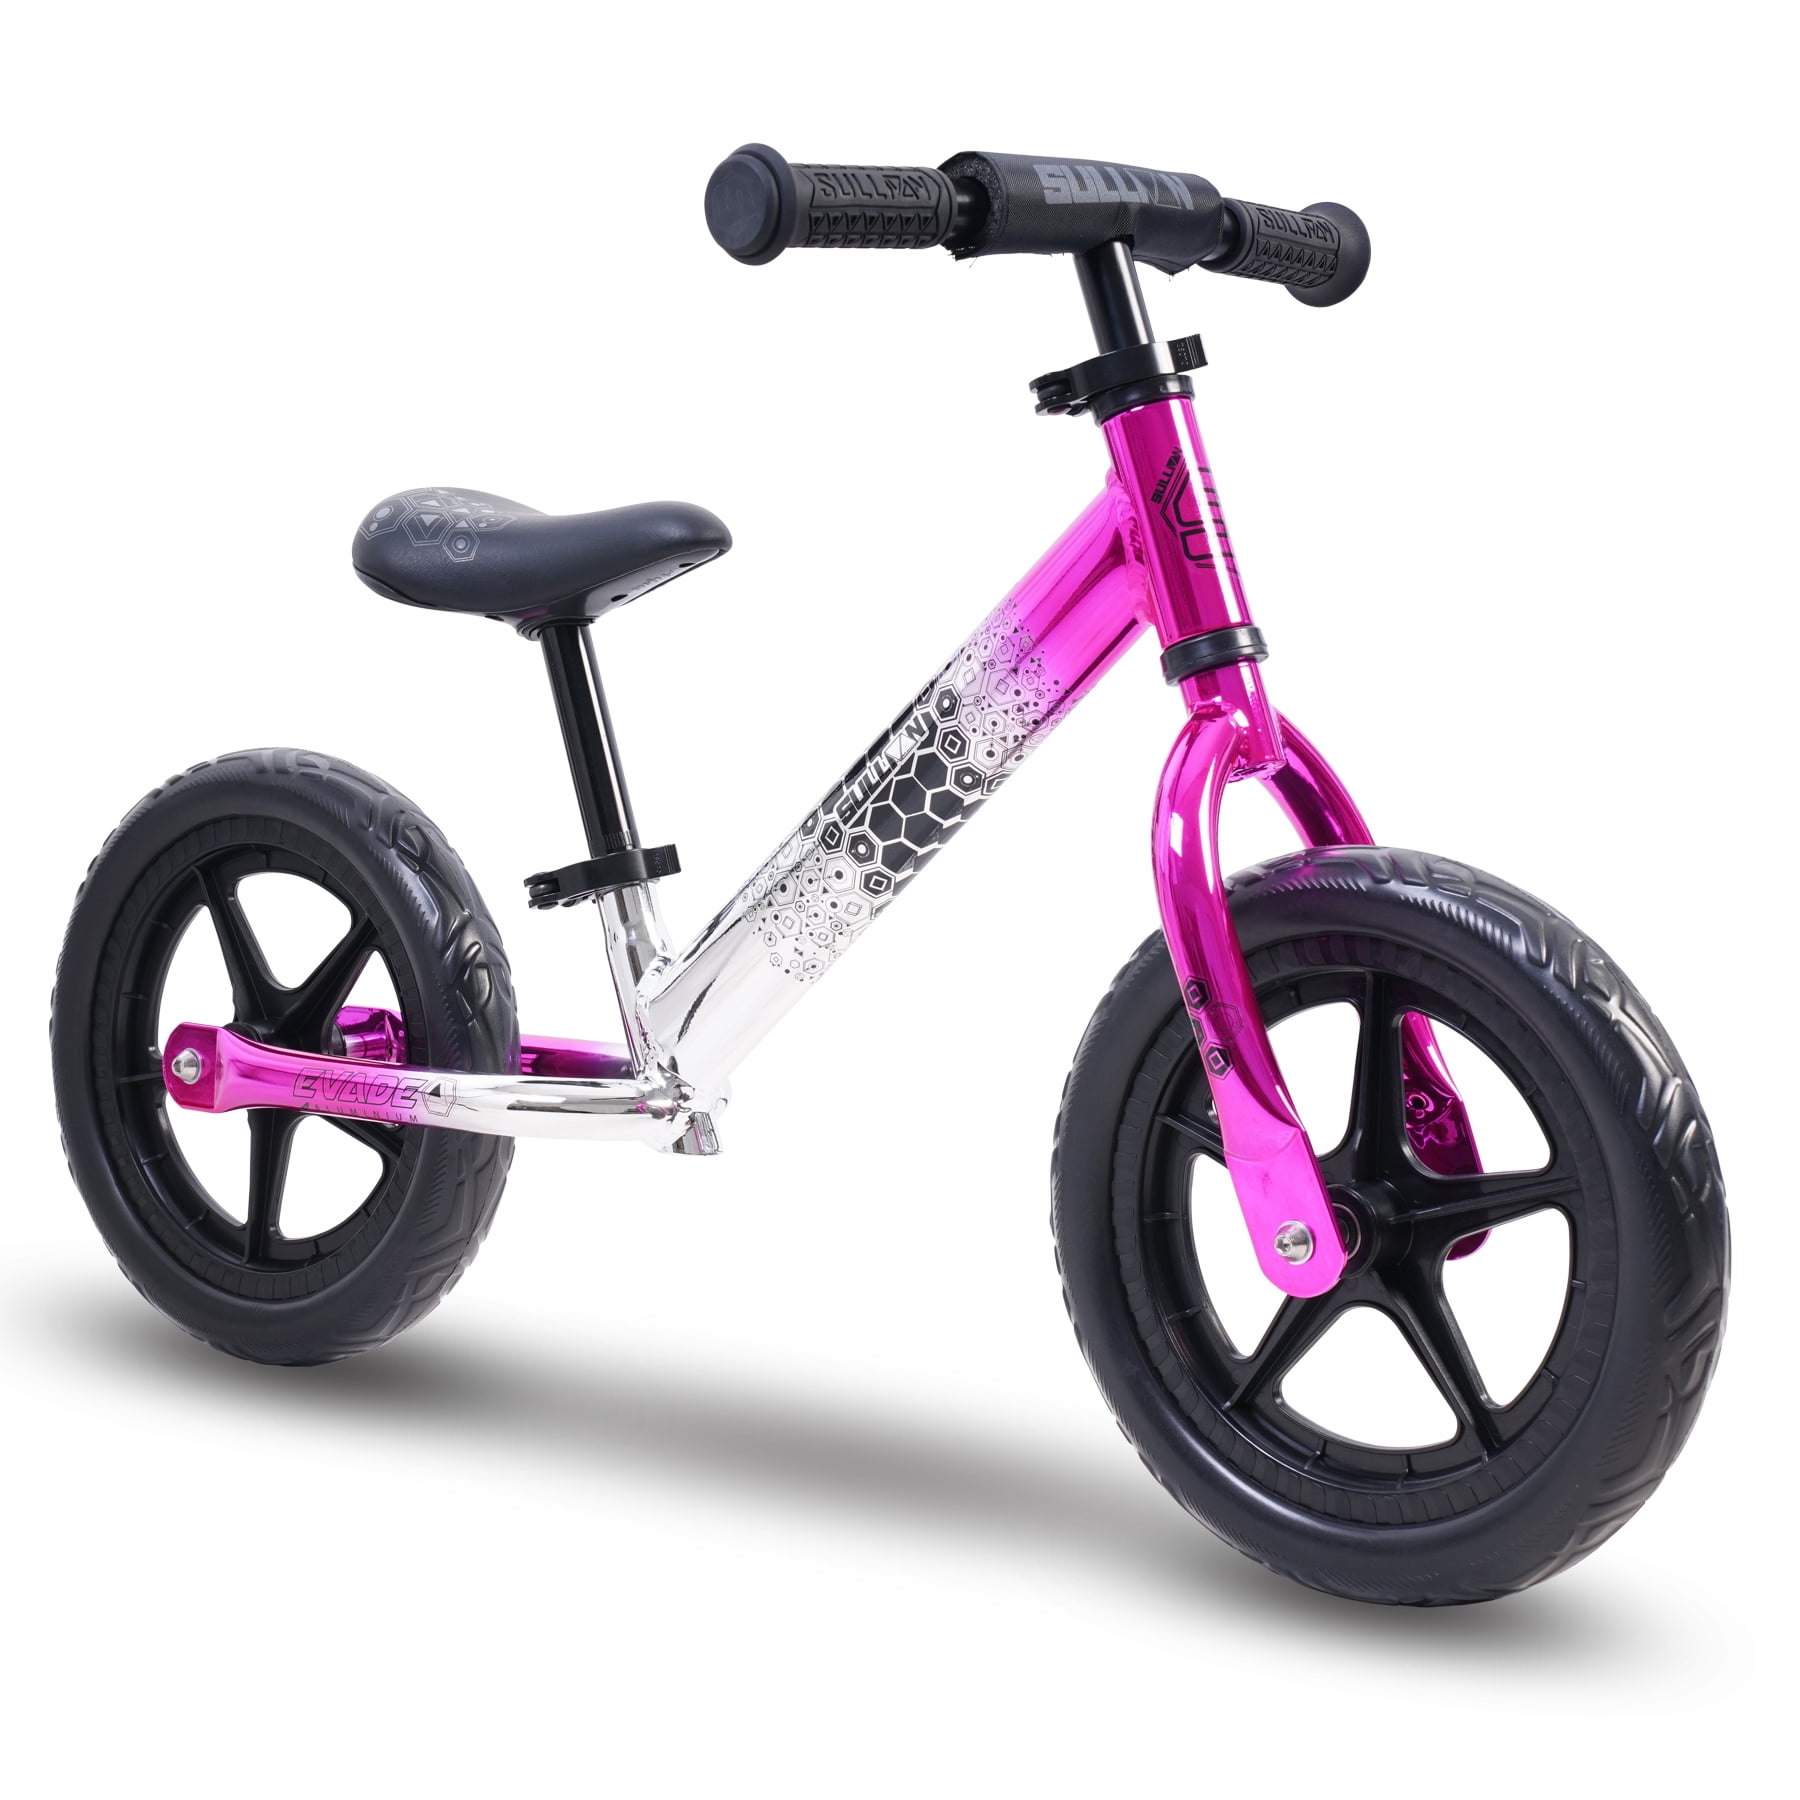 Sullivan Evade 12” Light Weight Alloy Balance Bike Non Pedal Strider Bike Rapid Motor Control Development for Ages 2-5 Years 